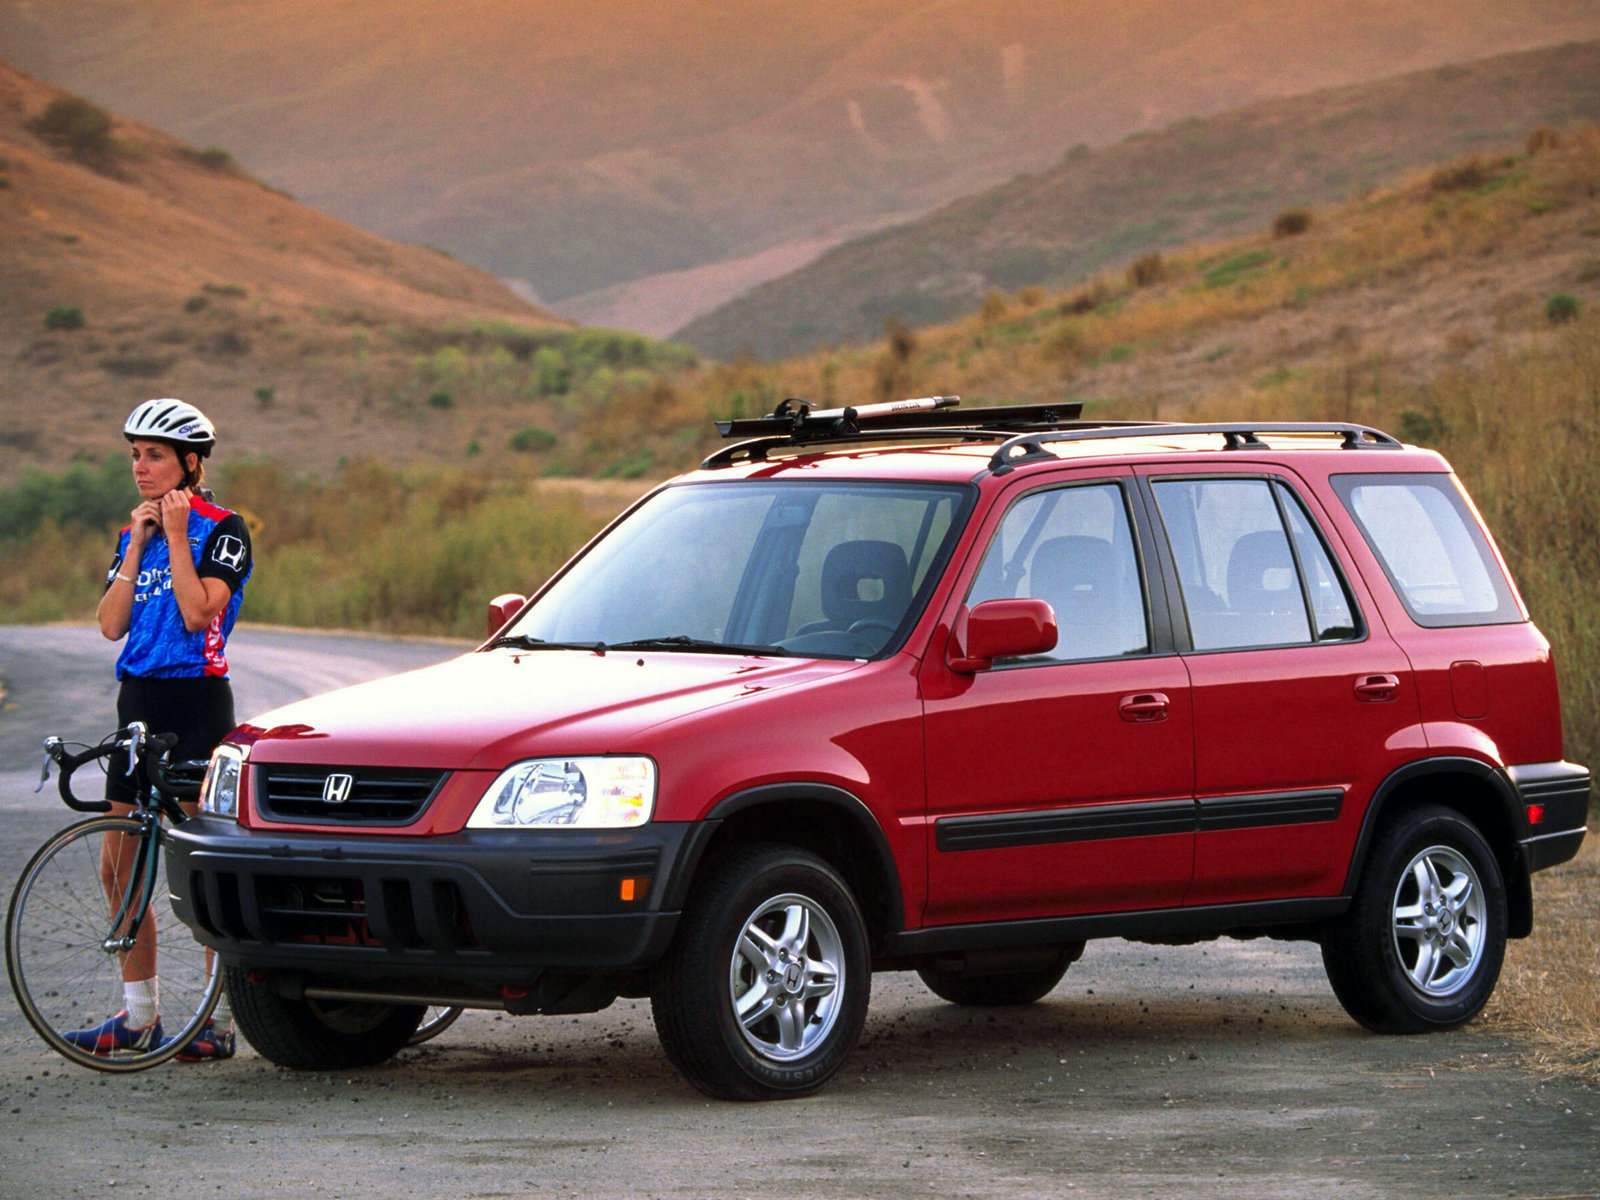 Honda CR-V 1995 — first SUV of the company with a monocoque body and independent suspension